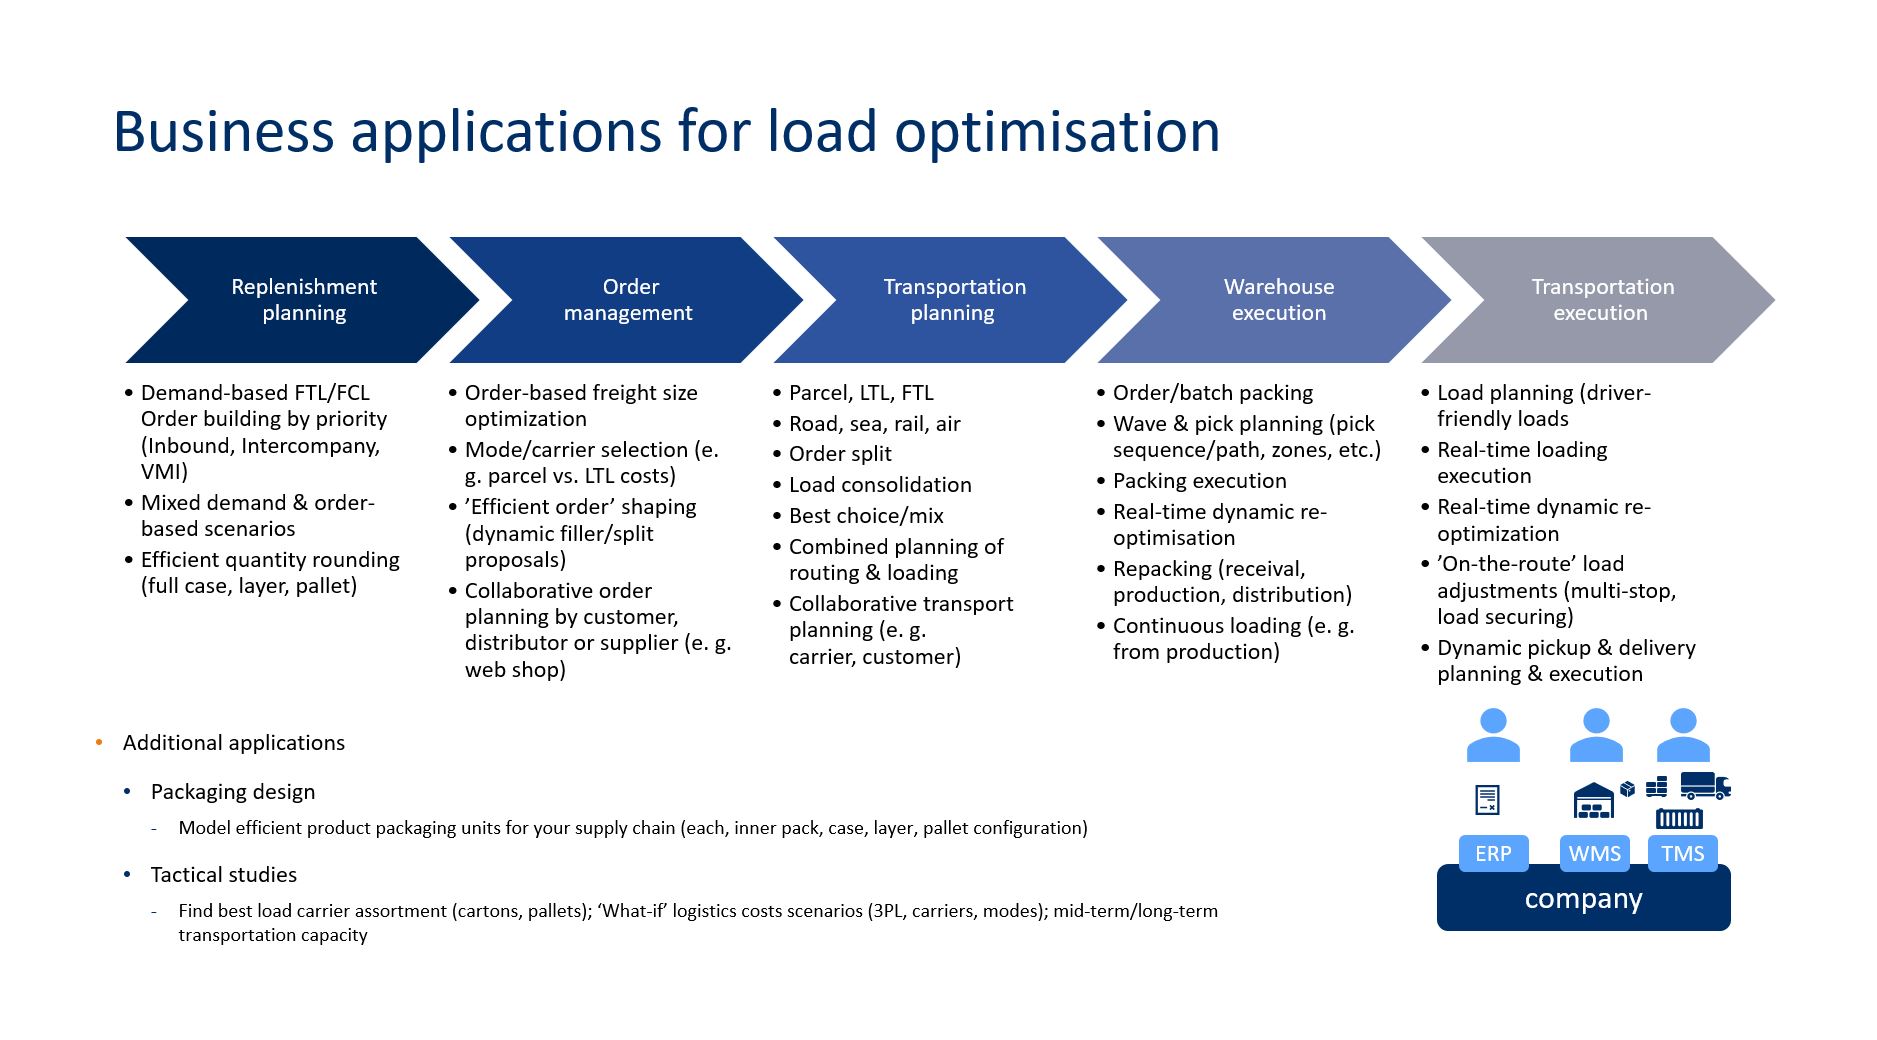 Business Application for load optimasation_ORTEC